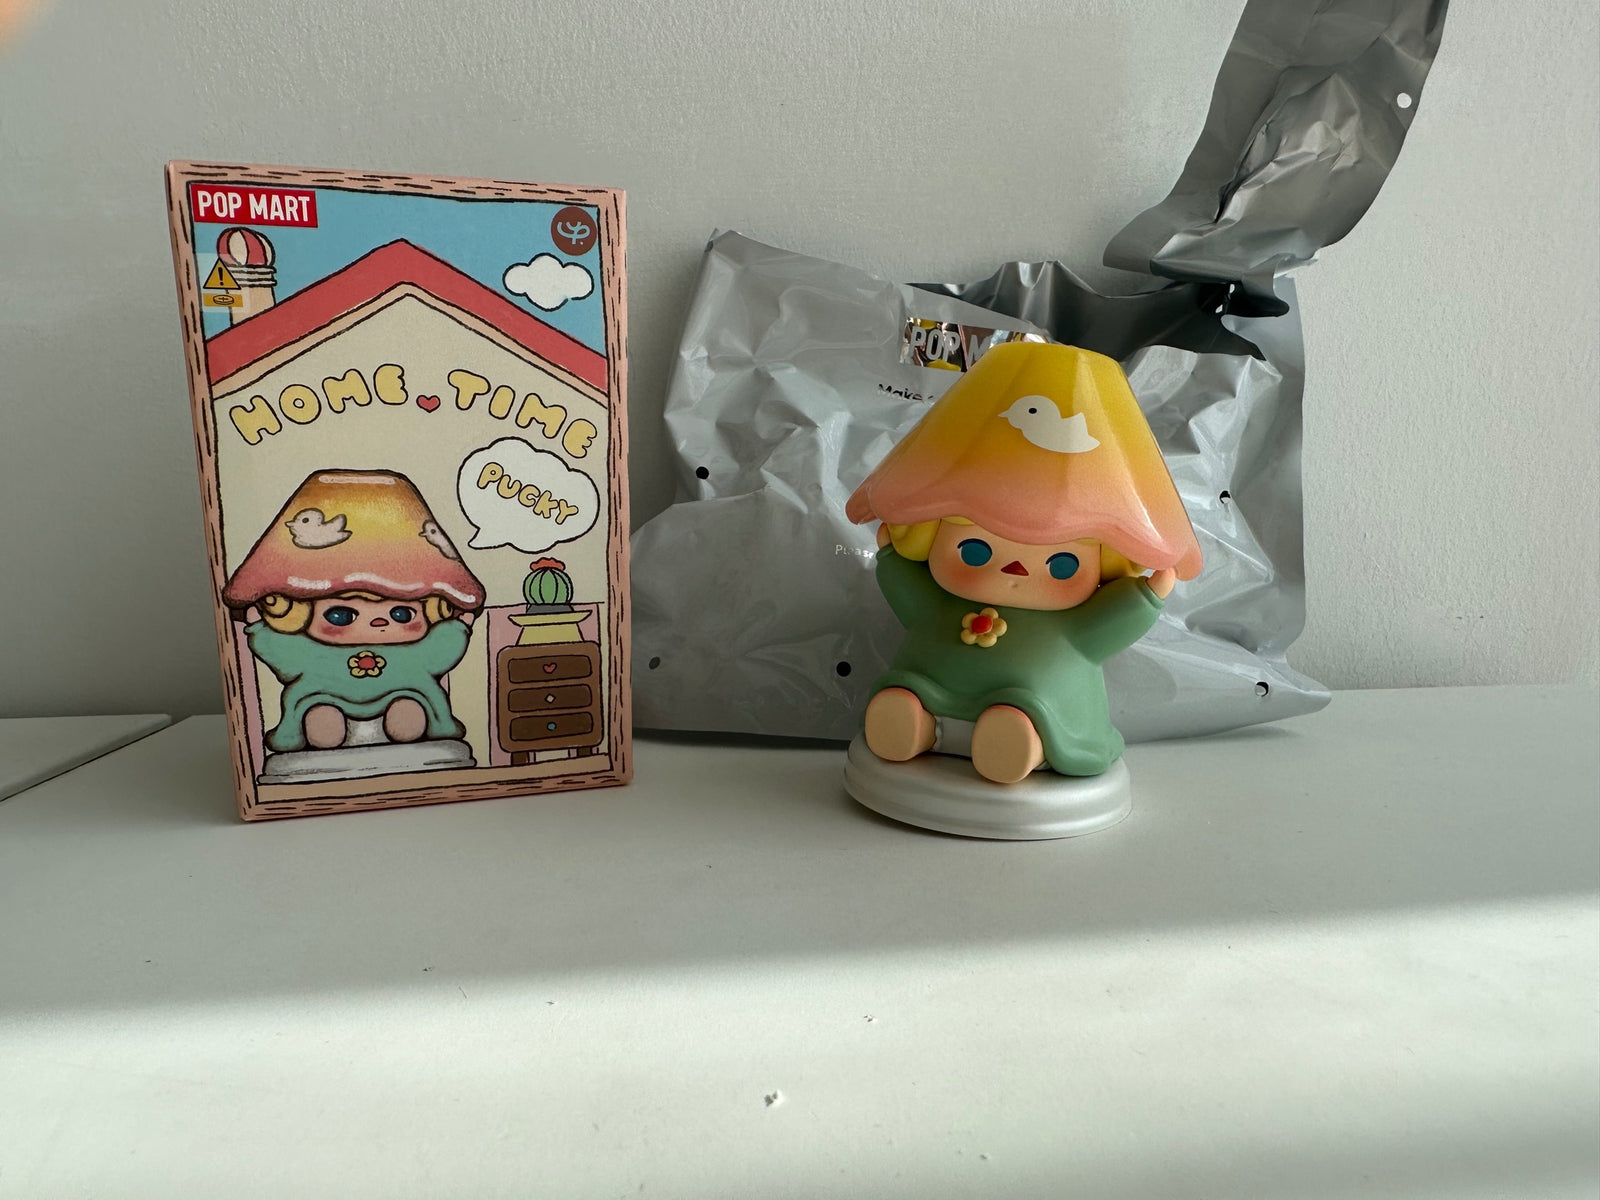 Goodnight Baby - Pucky Home Time Series Figures Blind Box by POP MART - 1